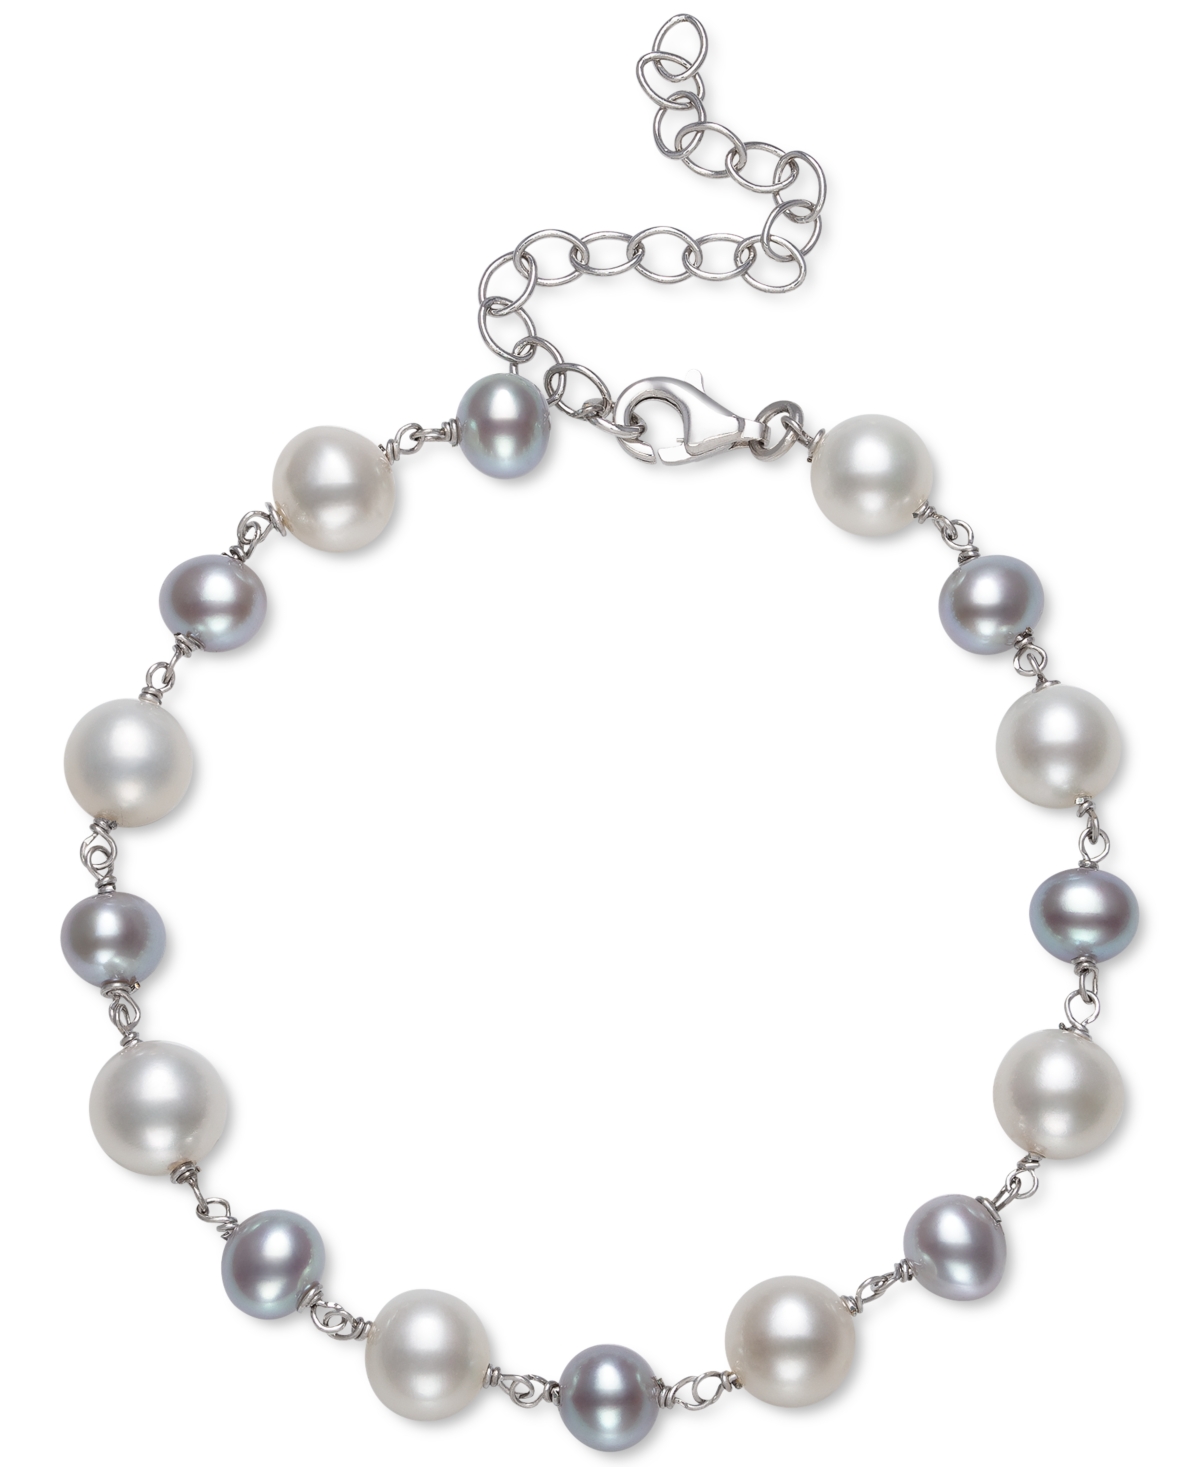 Gray & White Cultured Freshwater Pearl (5-6mm & 7-8mm) Bracelet in Sterling Silver (Also in Pink & White Cultured Freshwater Pearl), Crea